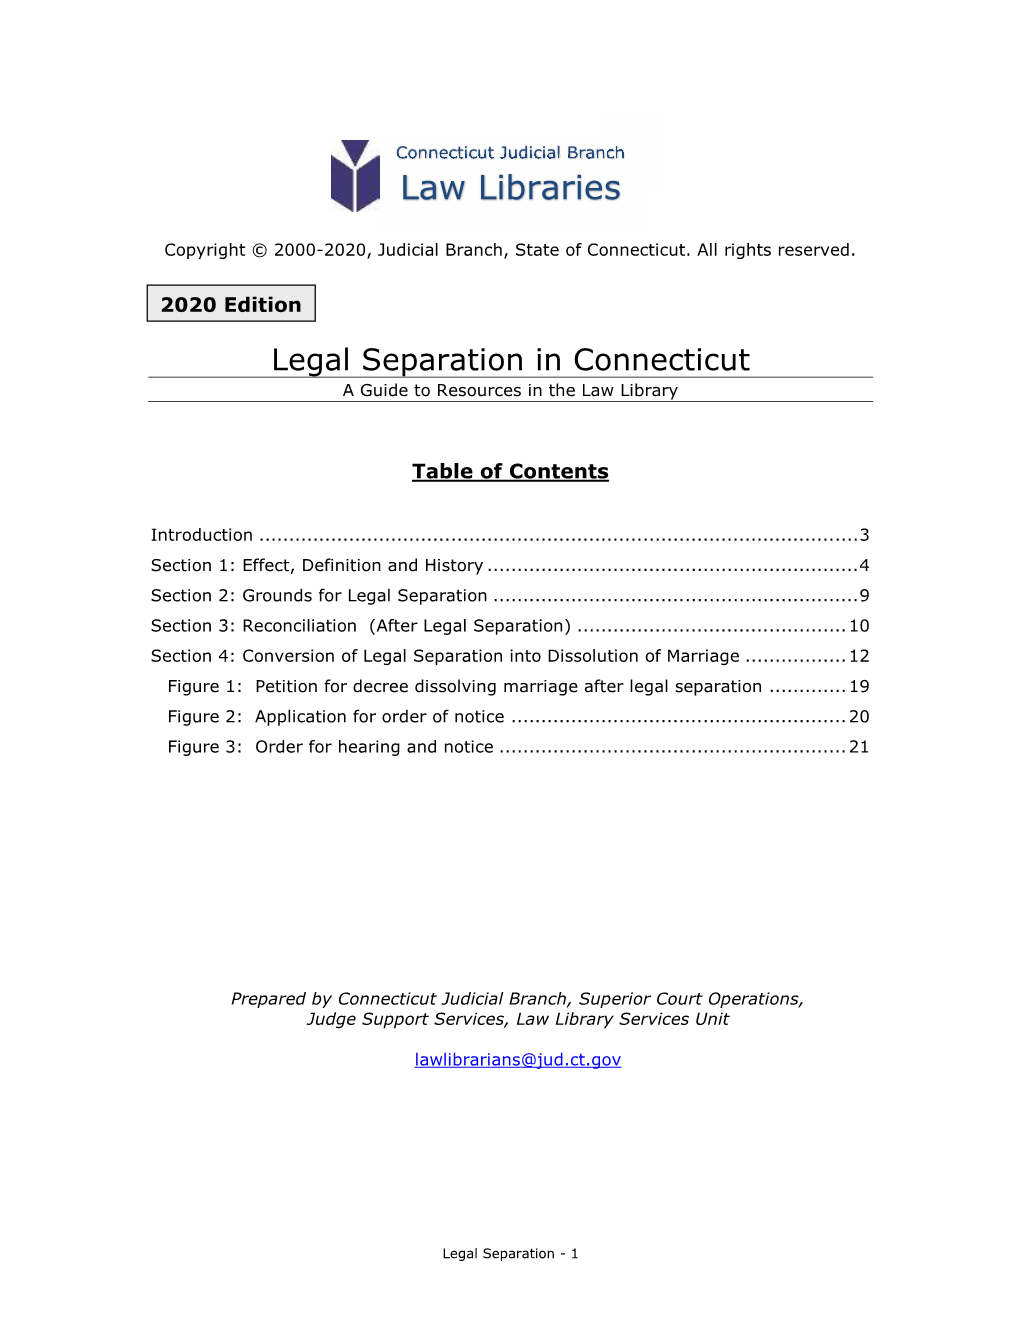 Legal Separation in Connecticut a Guide to Resources in the Law Library